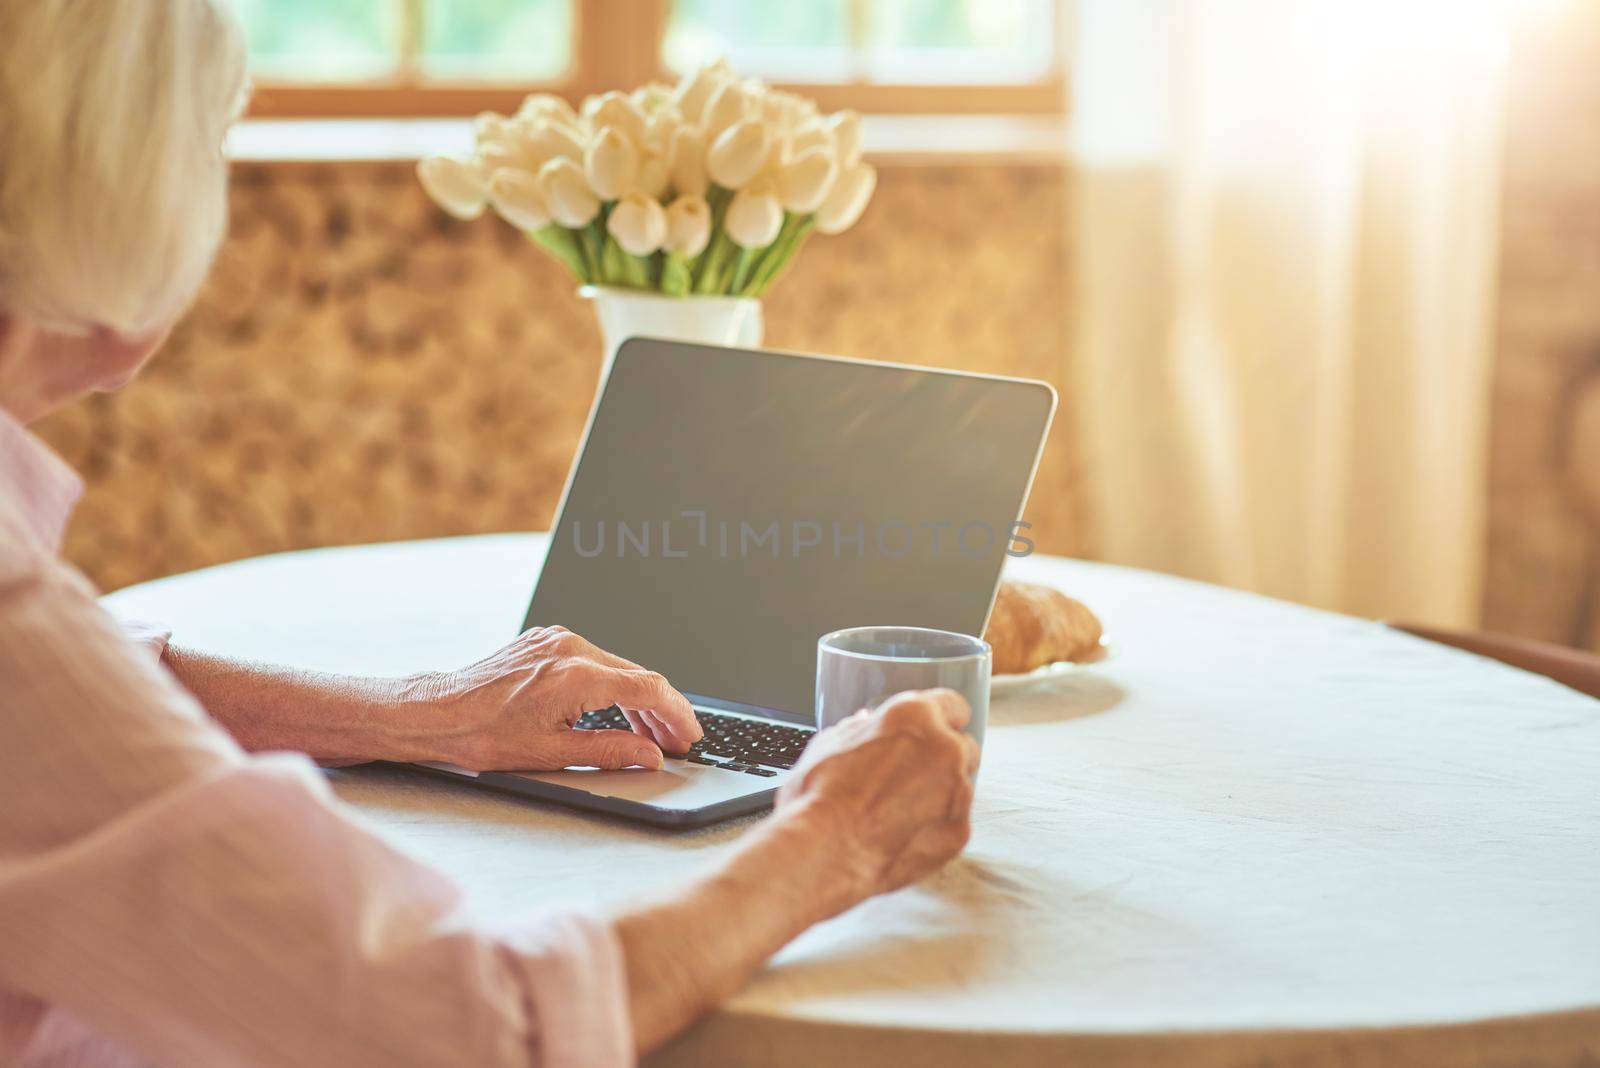 Elderly lady typing on computer in the morning by friendsstock